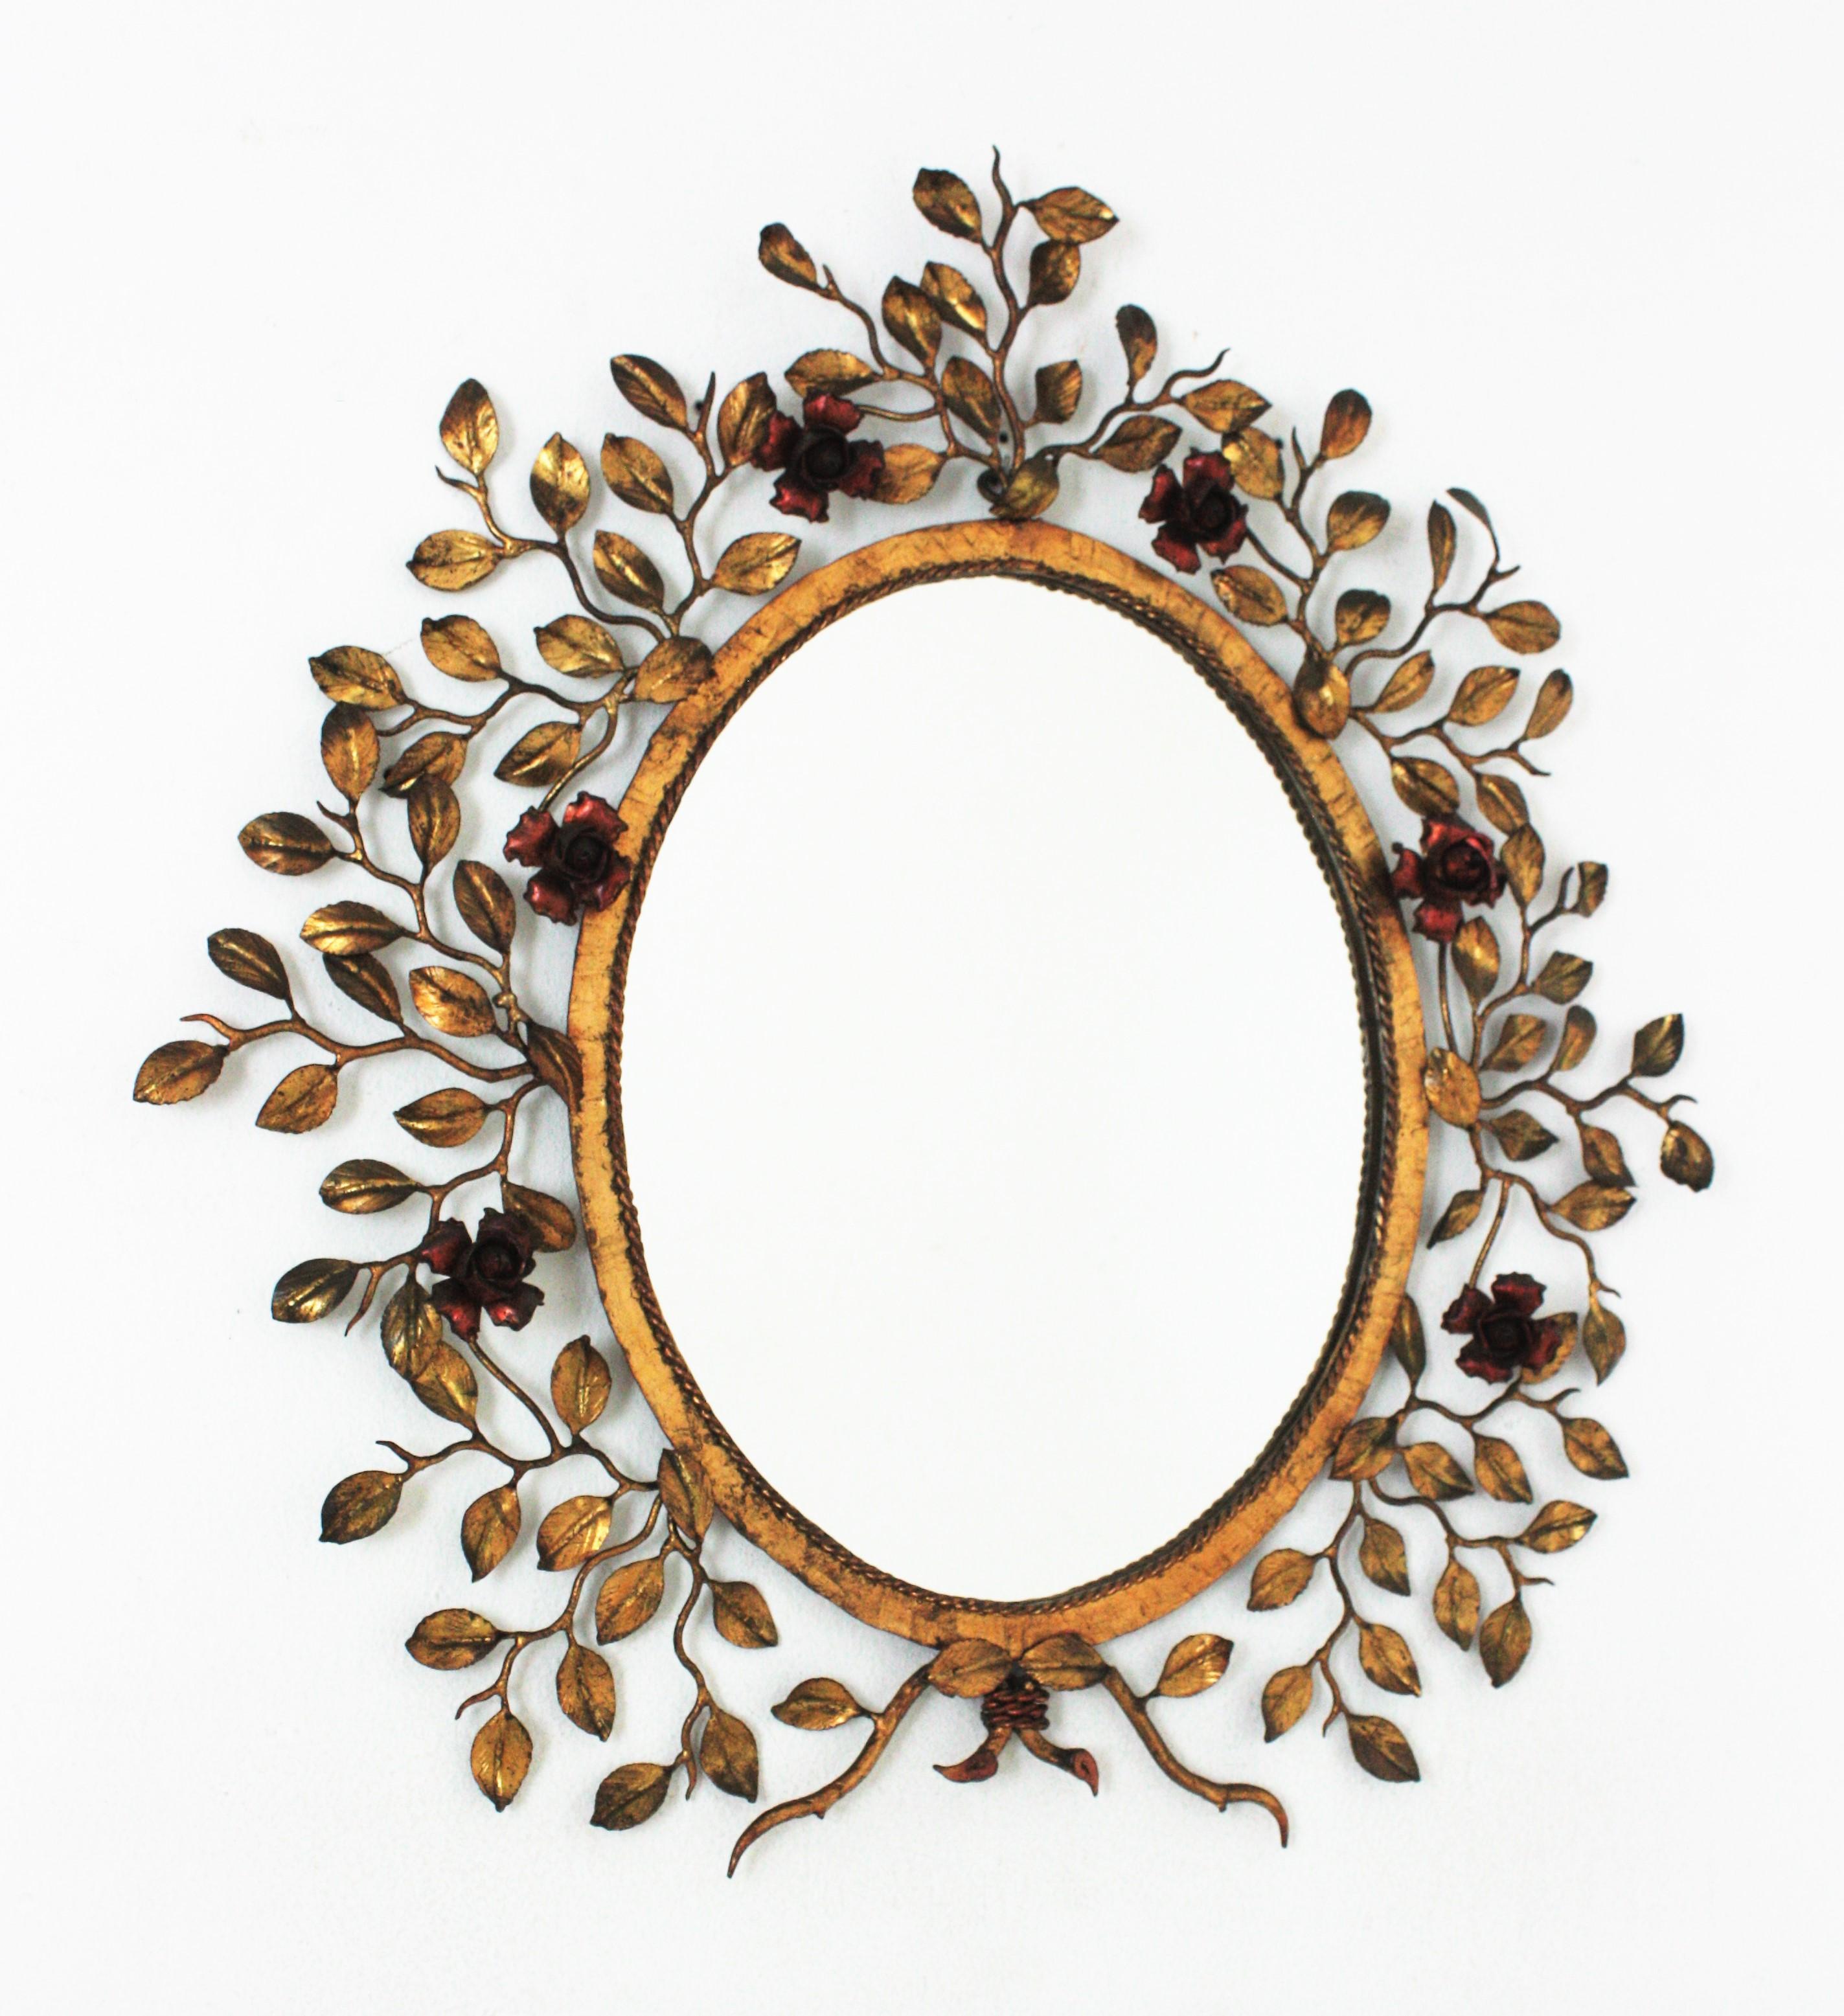 Outstanding foliage Floral Oval Mirror in Gilt Hand Forged Iron, Spain, 1950s.
Hand wrought iron oval sunburst wall mirror with foliage frame, red floral accents and gold leaf gilding.
The frame features and intrincate of branches and leaves with